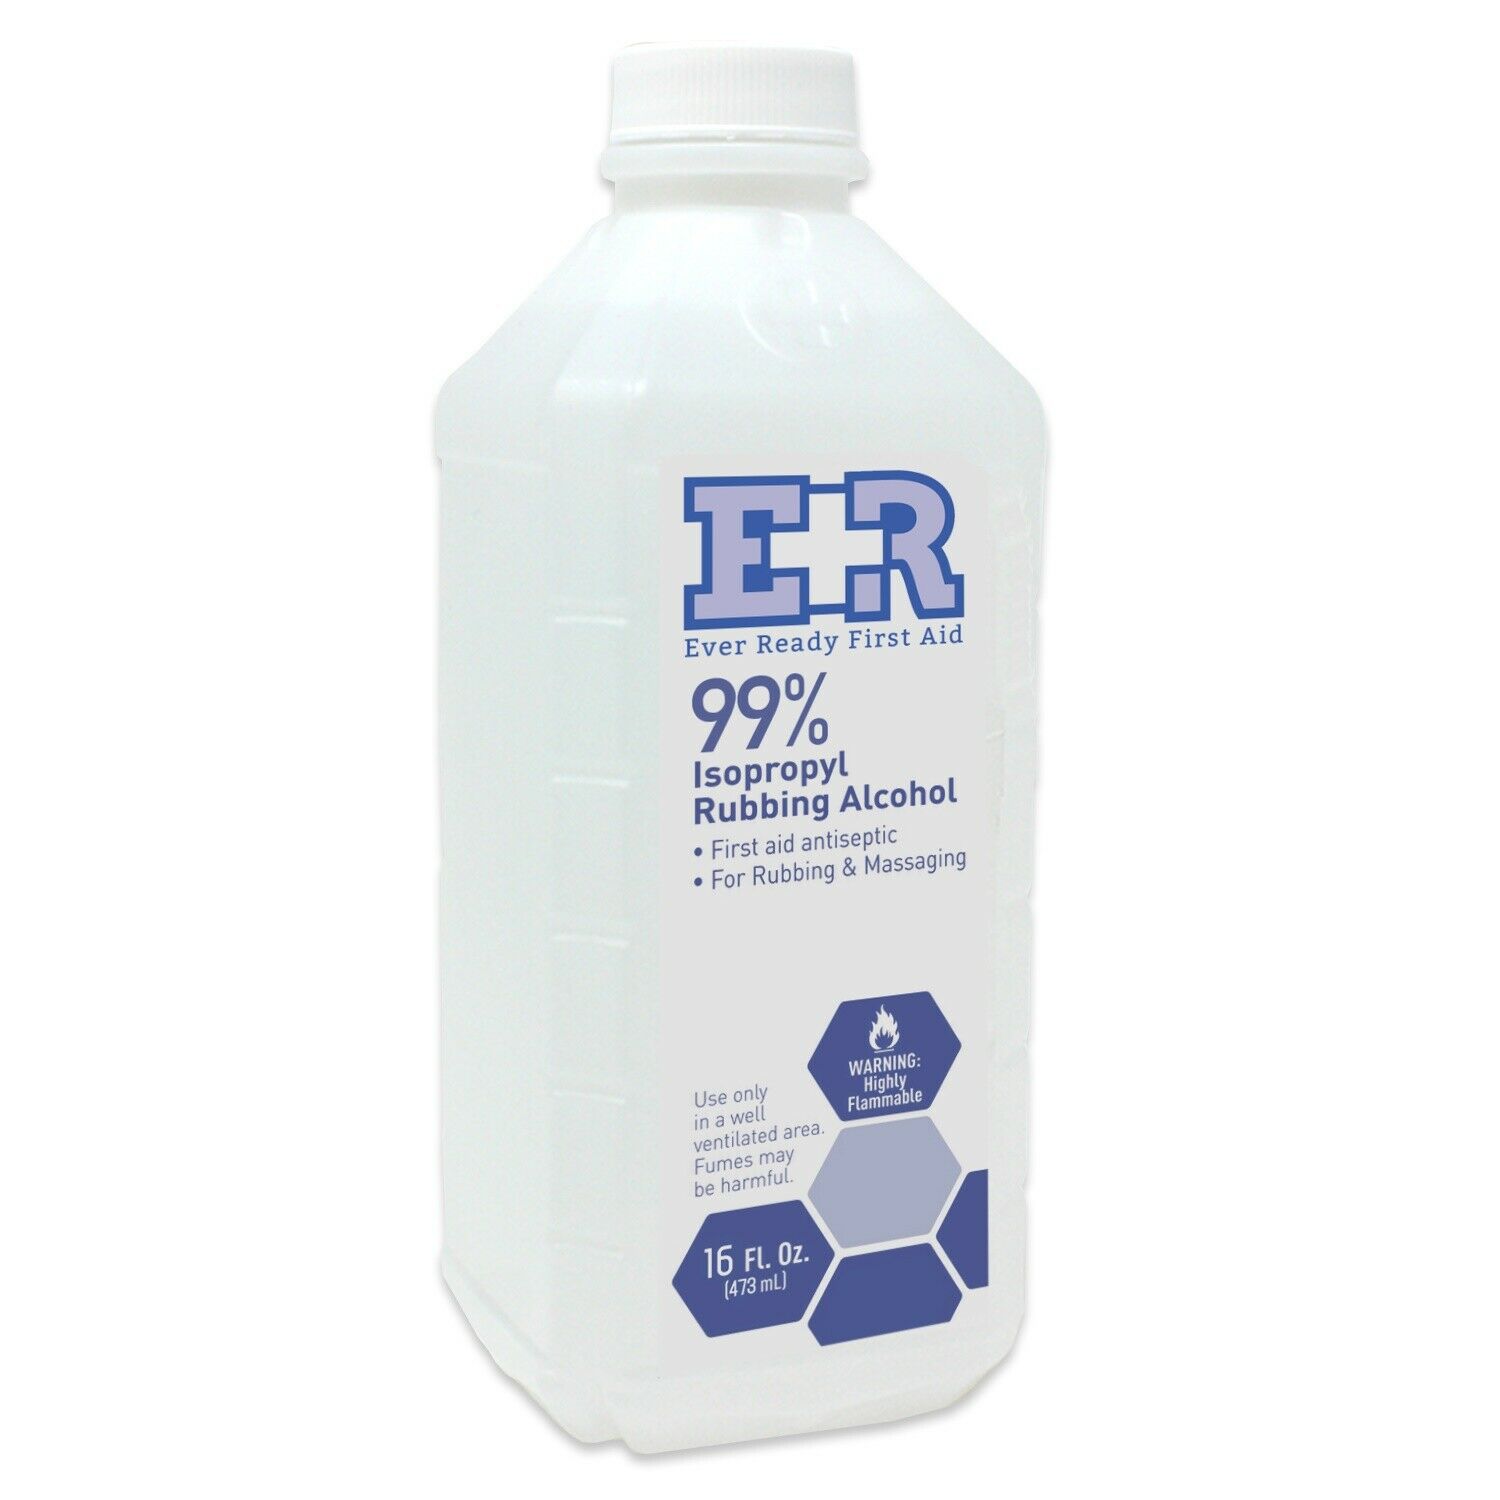 Rubbing Alcohol Ever Ready First Aid 99% Isopropyl 16oz Ever Ready